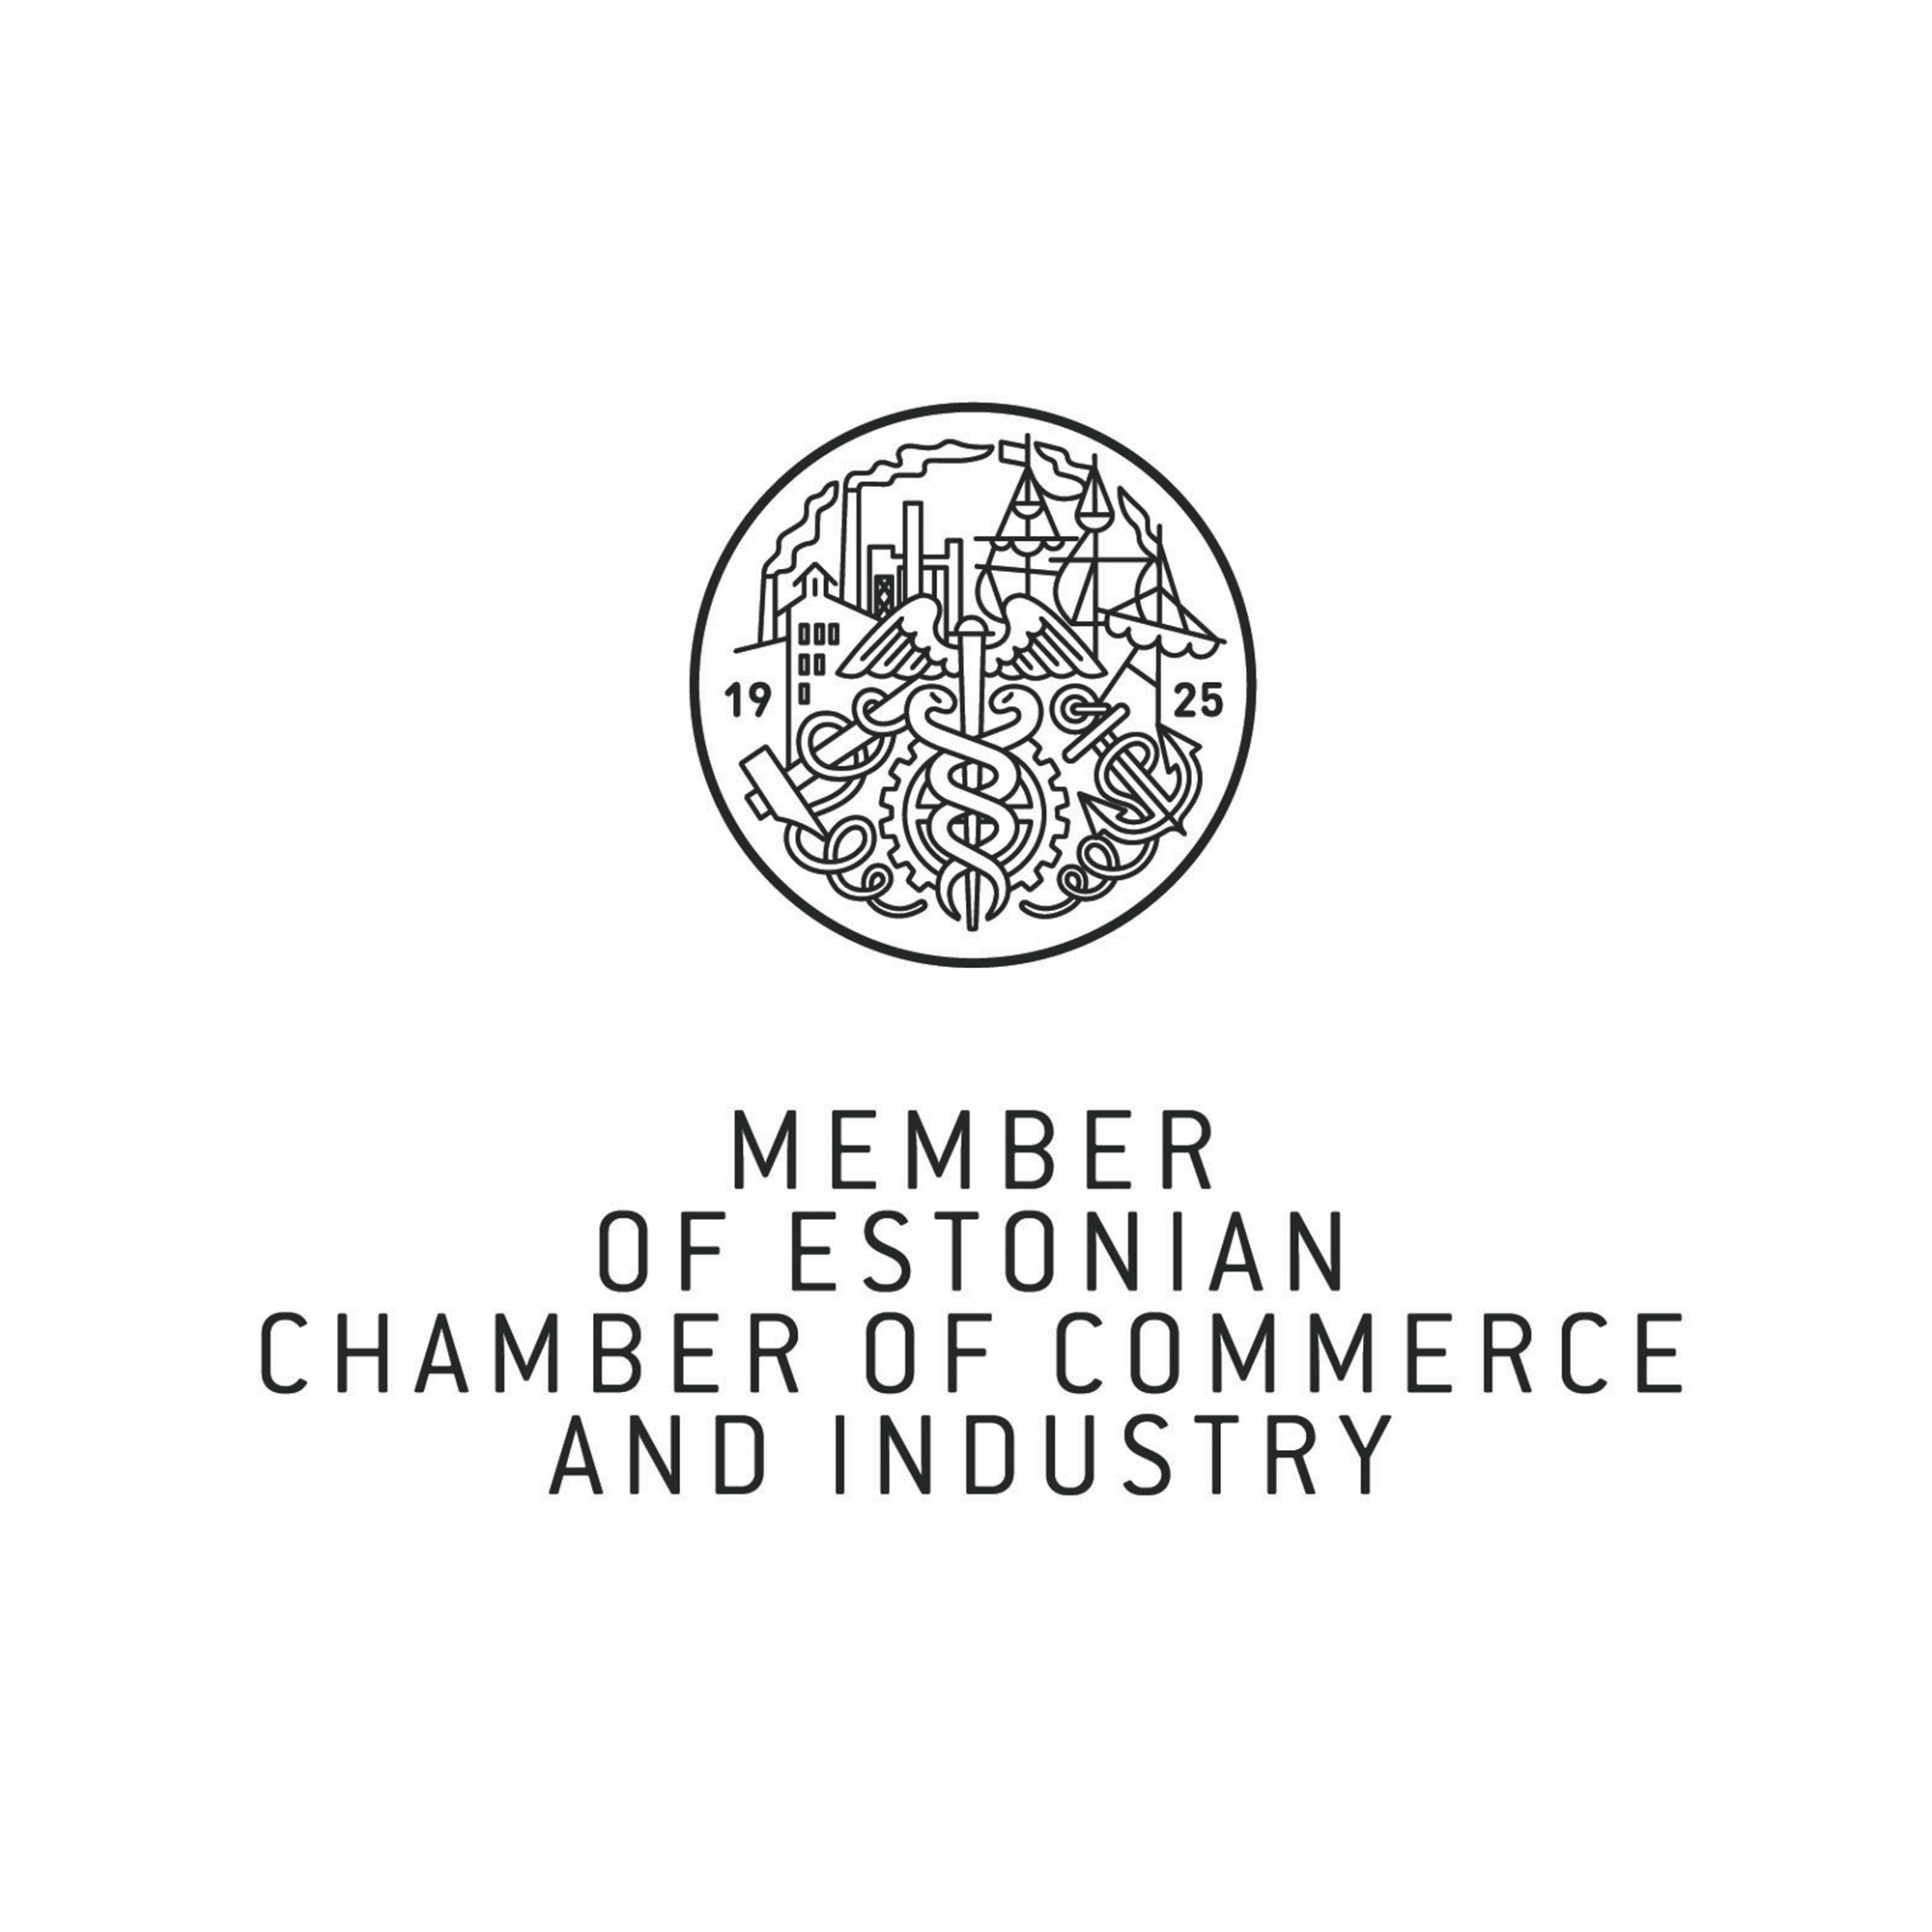 The Estonian Chamber of Commerce and Industry